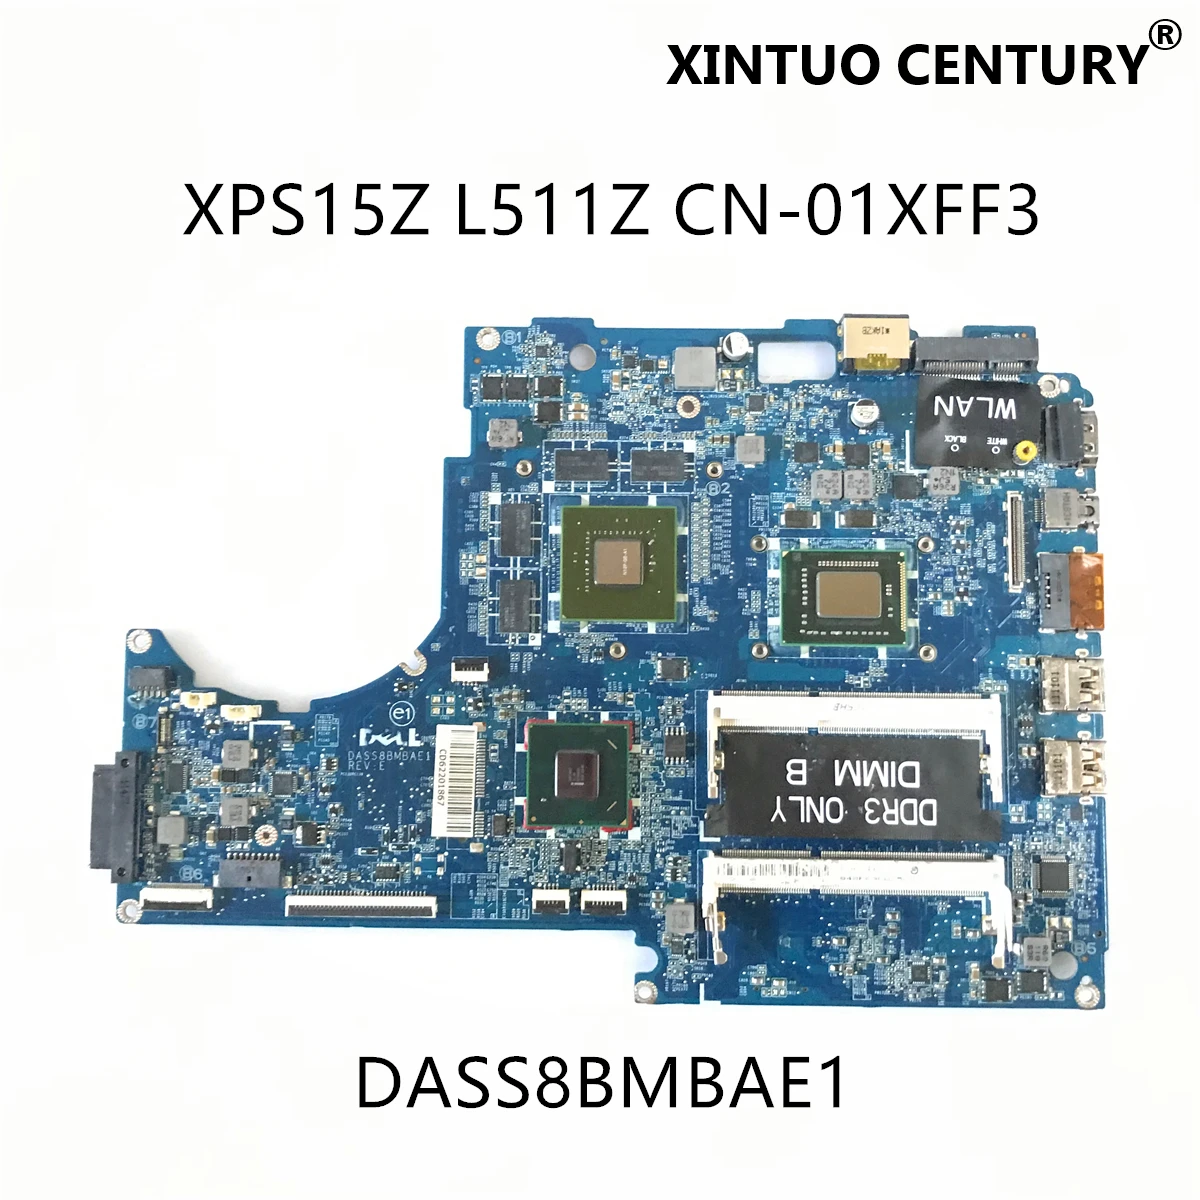 

CN-01XFF3 01XFF3 1XFF3 DASS8BMBAE1 For Dell XPS 15Z L511Z Laptop Motherboard With I7-2640M CPU N12P-GE-A1 HM67 100% Test Work